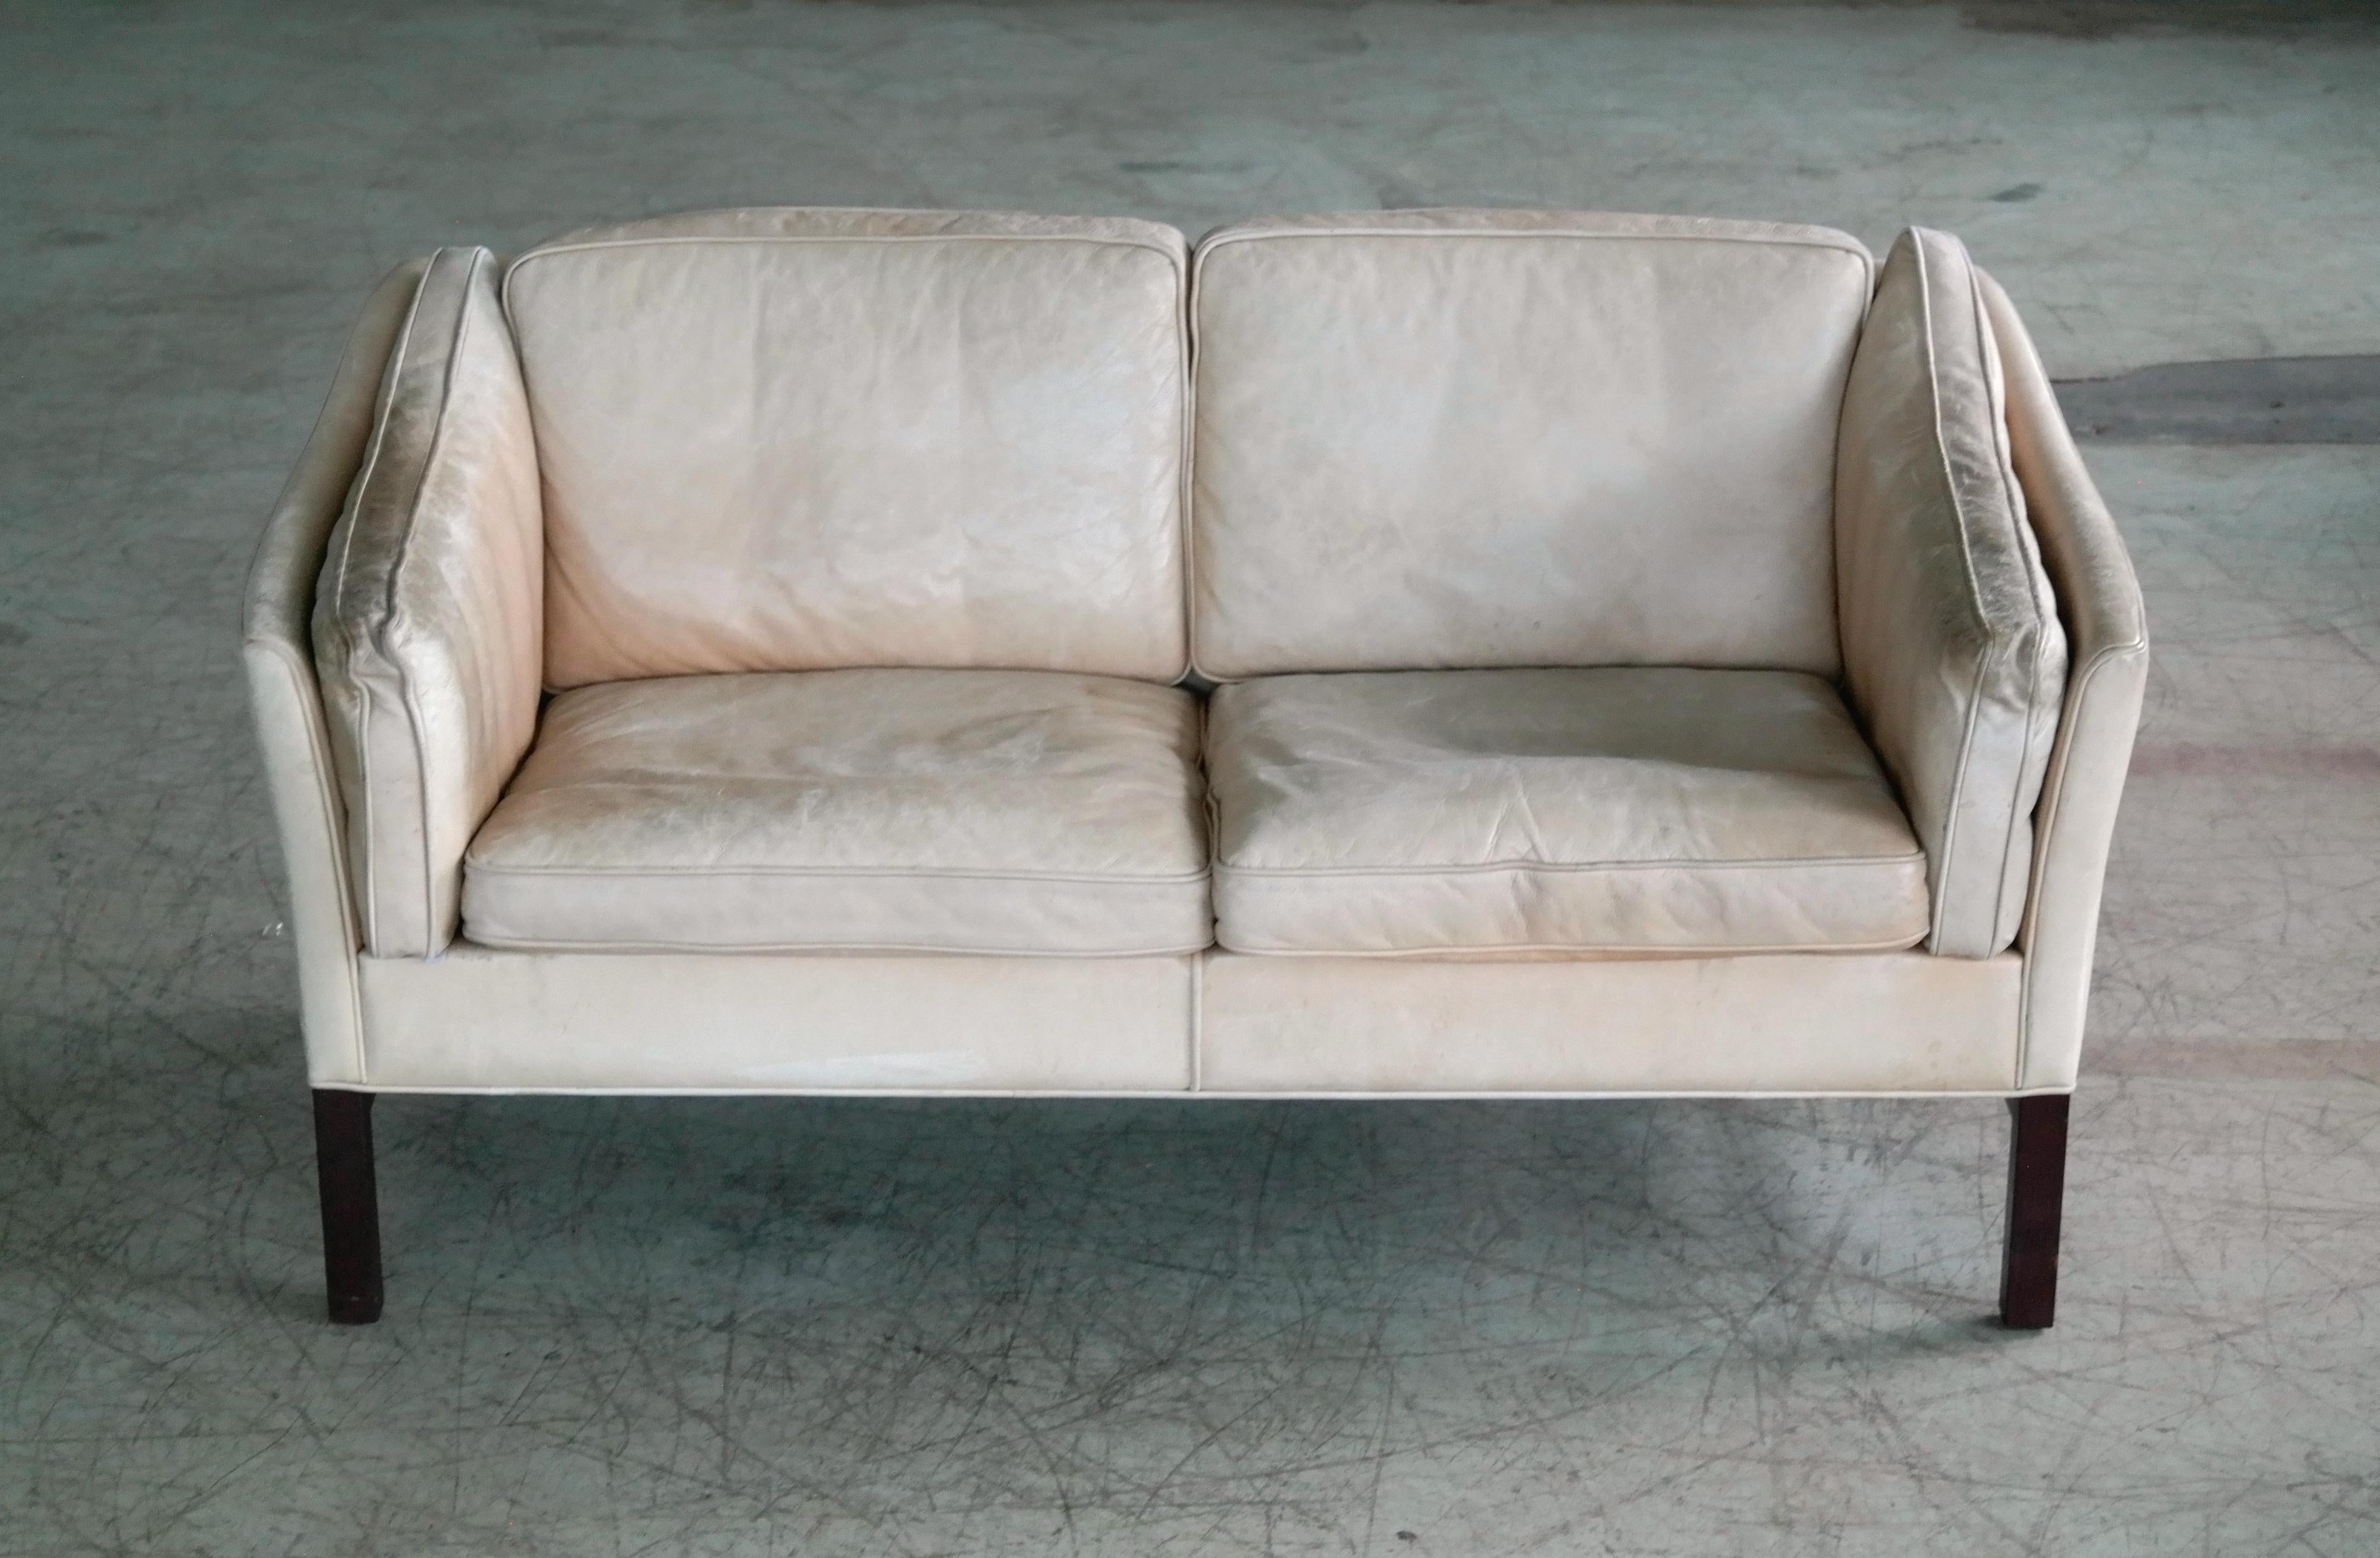 Late 20th Century Danish Midcentury Illum Wikkelso Attributed, Two-Seat Sofa in Worn Tan Leather